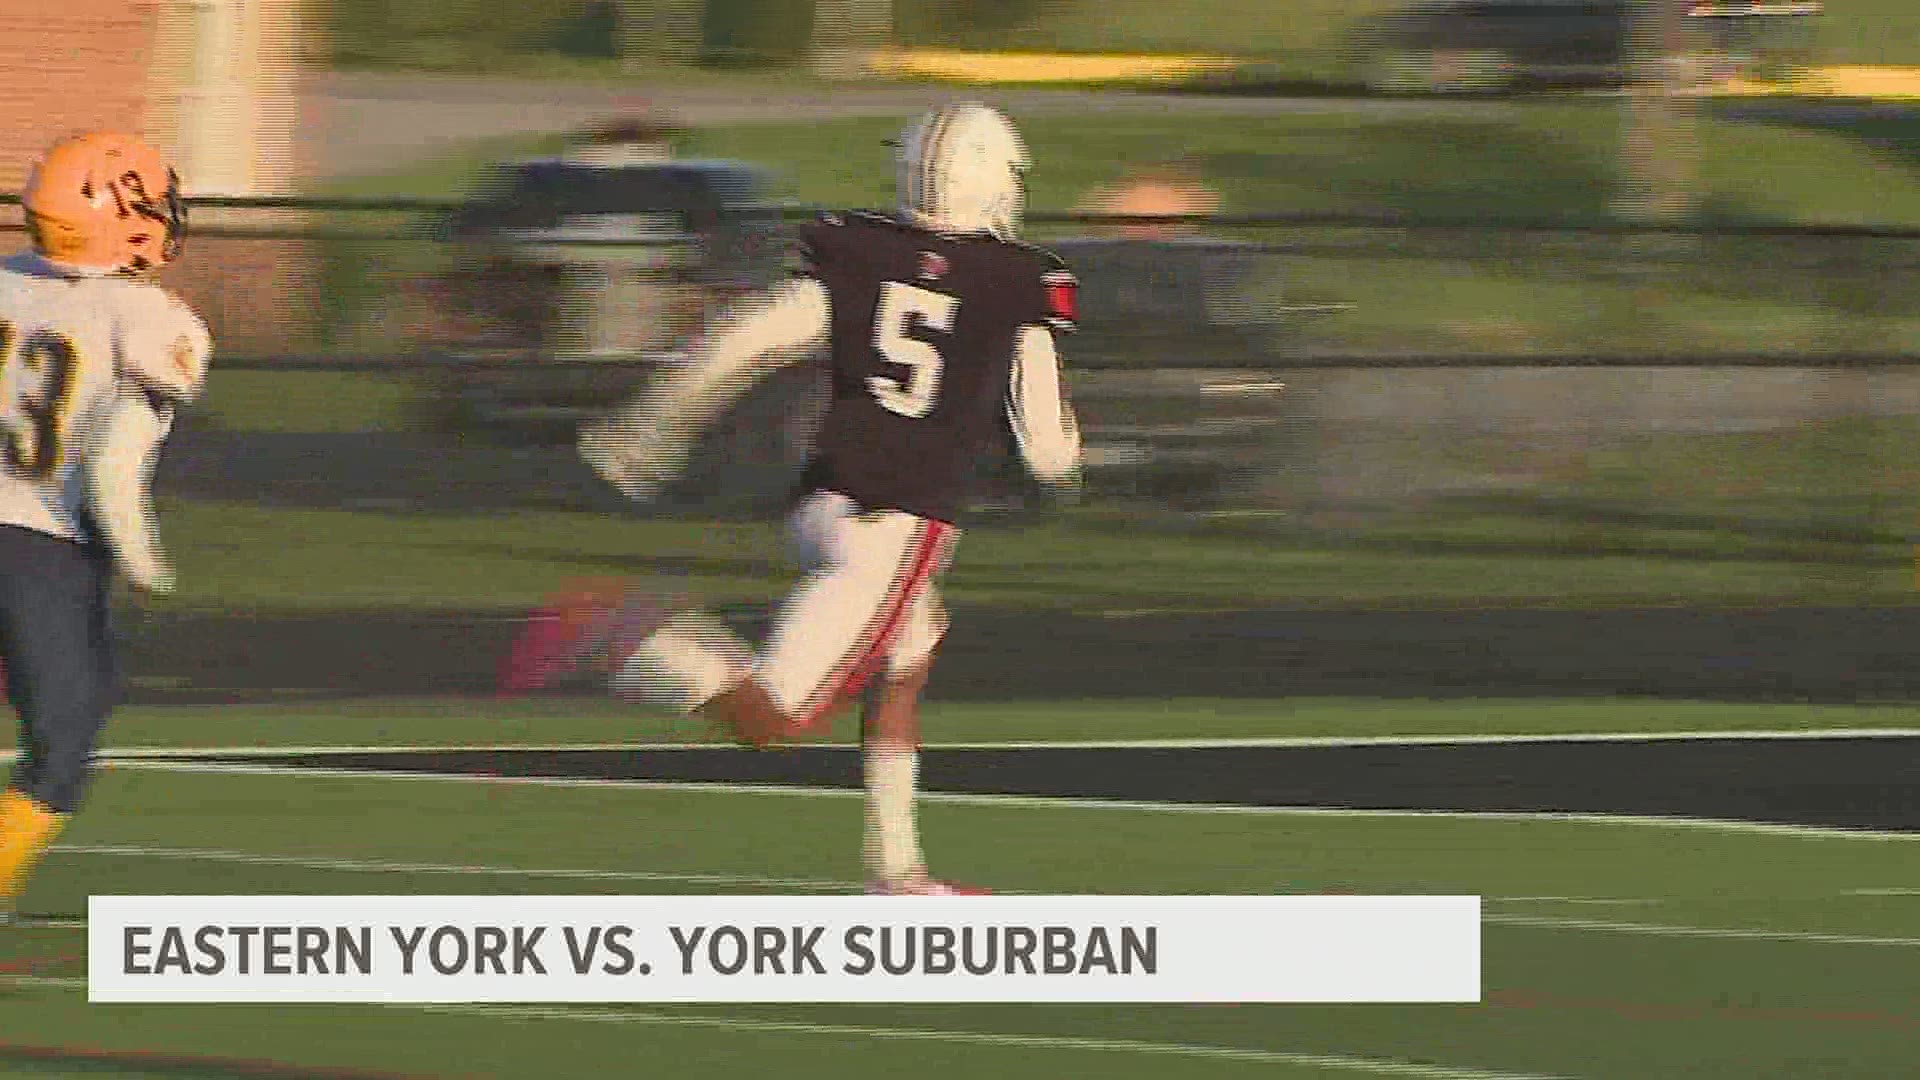 Kenny Johnson finishes the game with five touchdown receptions and 198 yards in the York Suburban win.